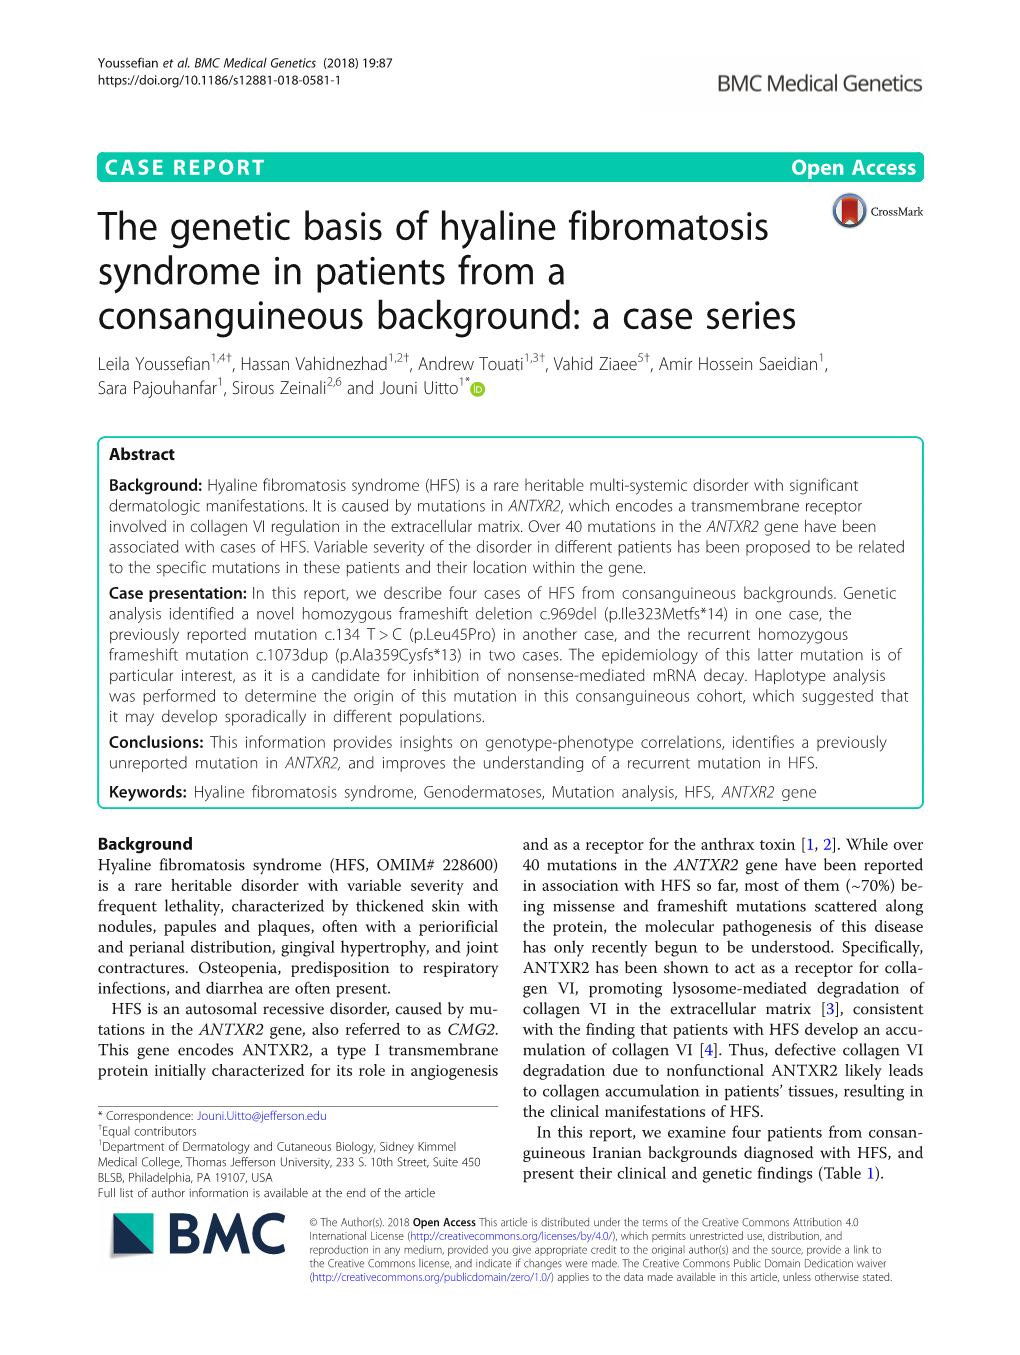 The Genetic Basis of Hyaline Fibromatosis Syndrome in Patients from a Consanguineous Background: a Case Series